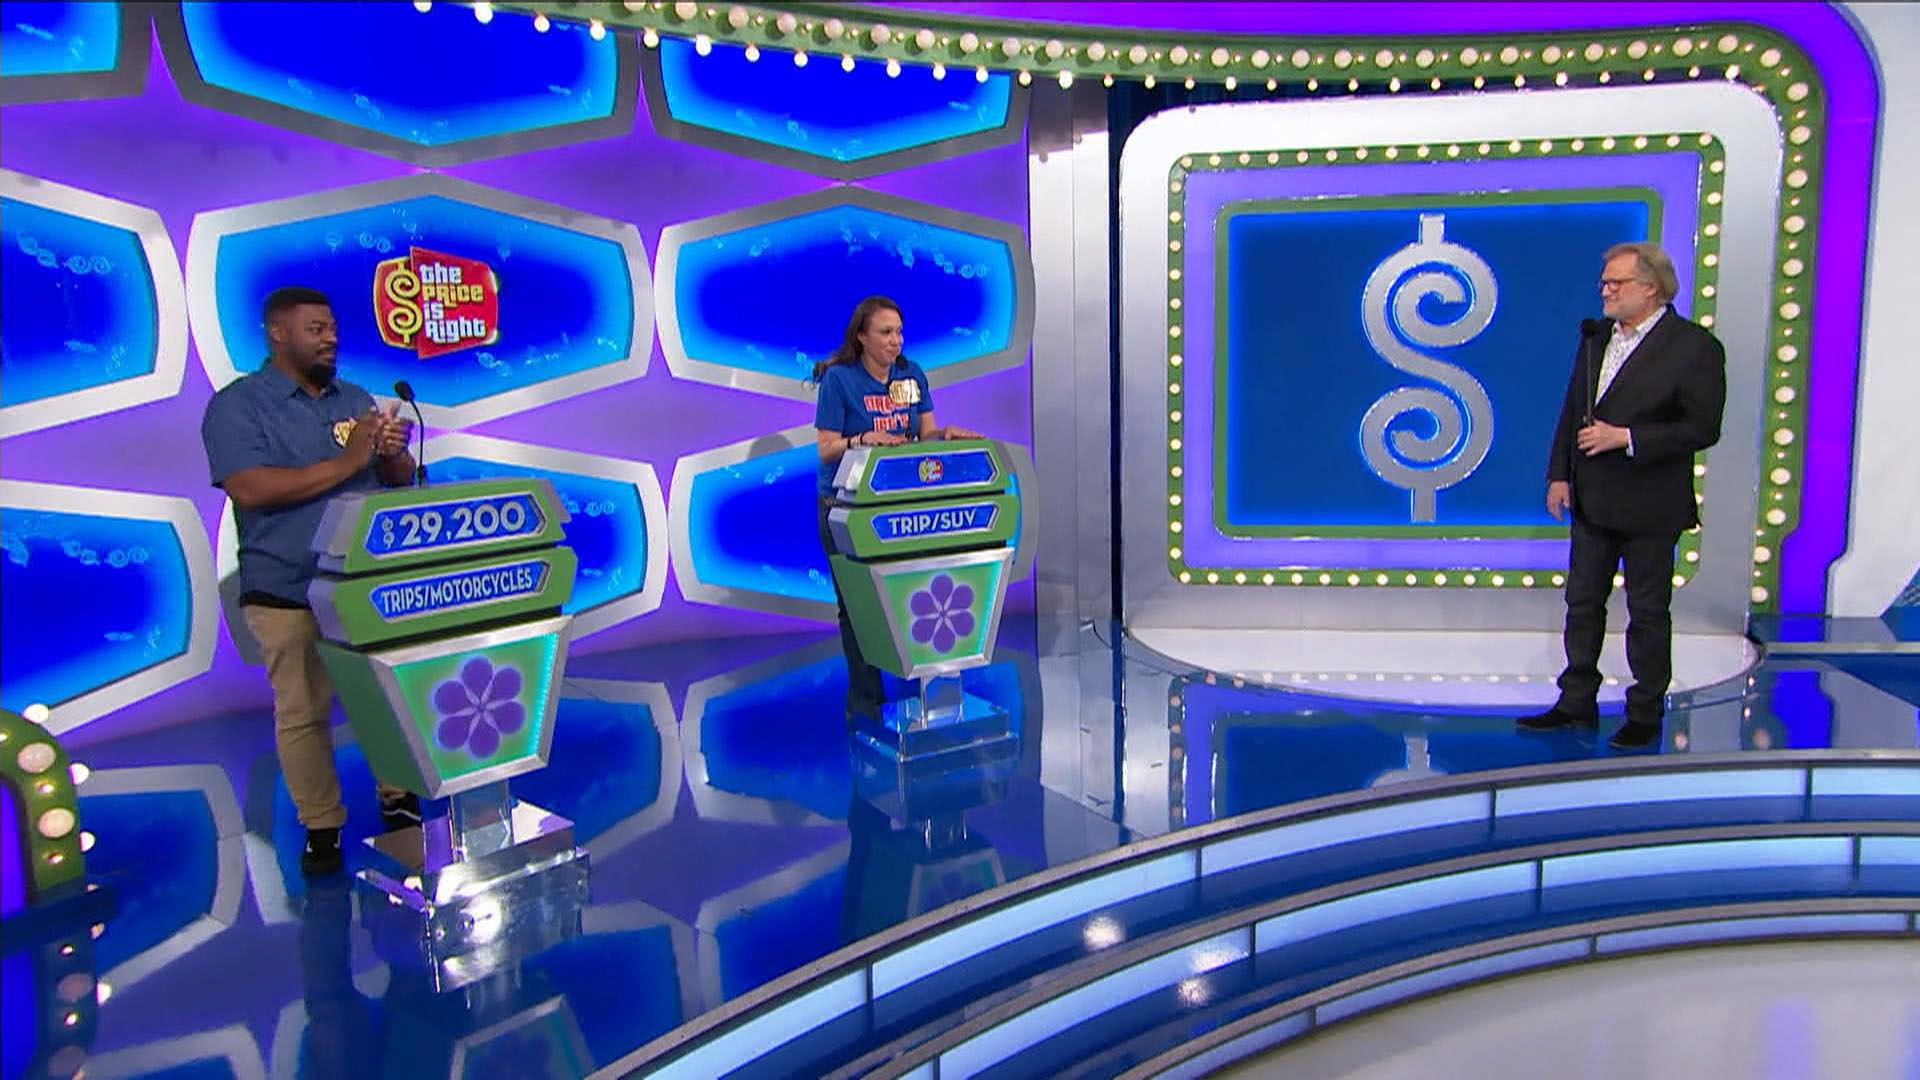 Watch CBS Mornings "The Price is Right" gets a new home Full show on